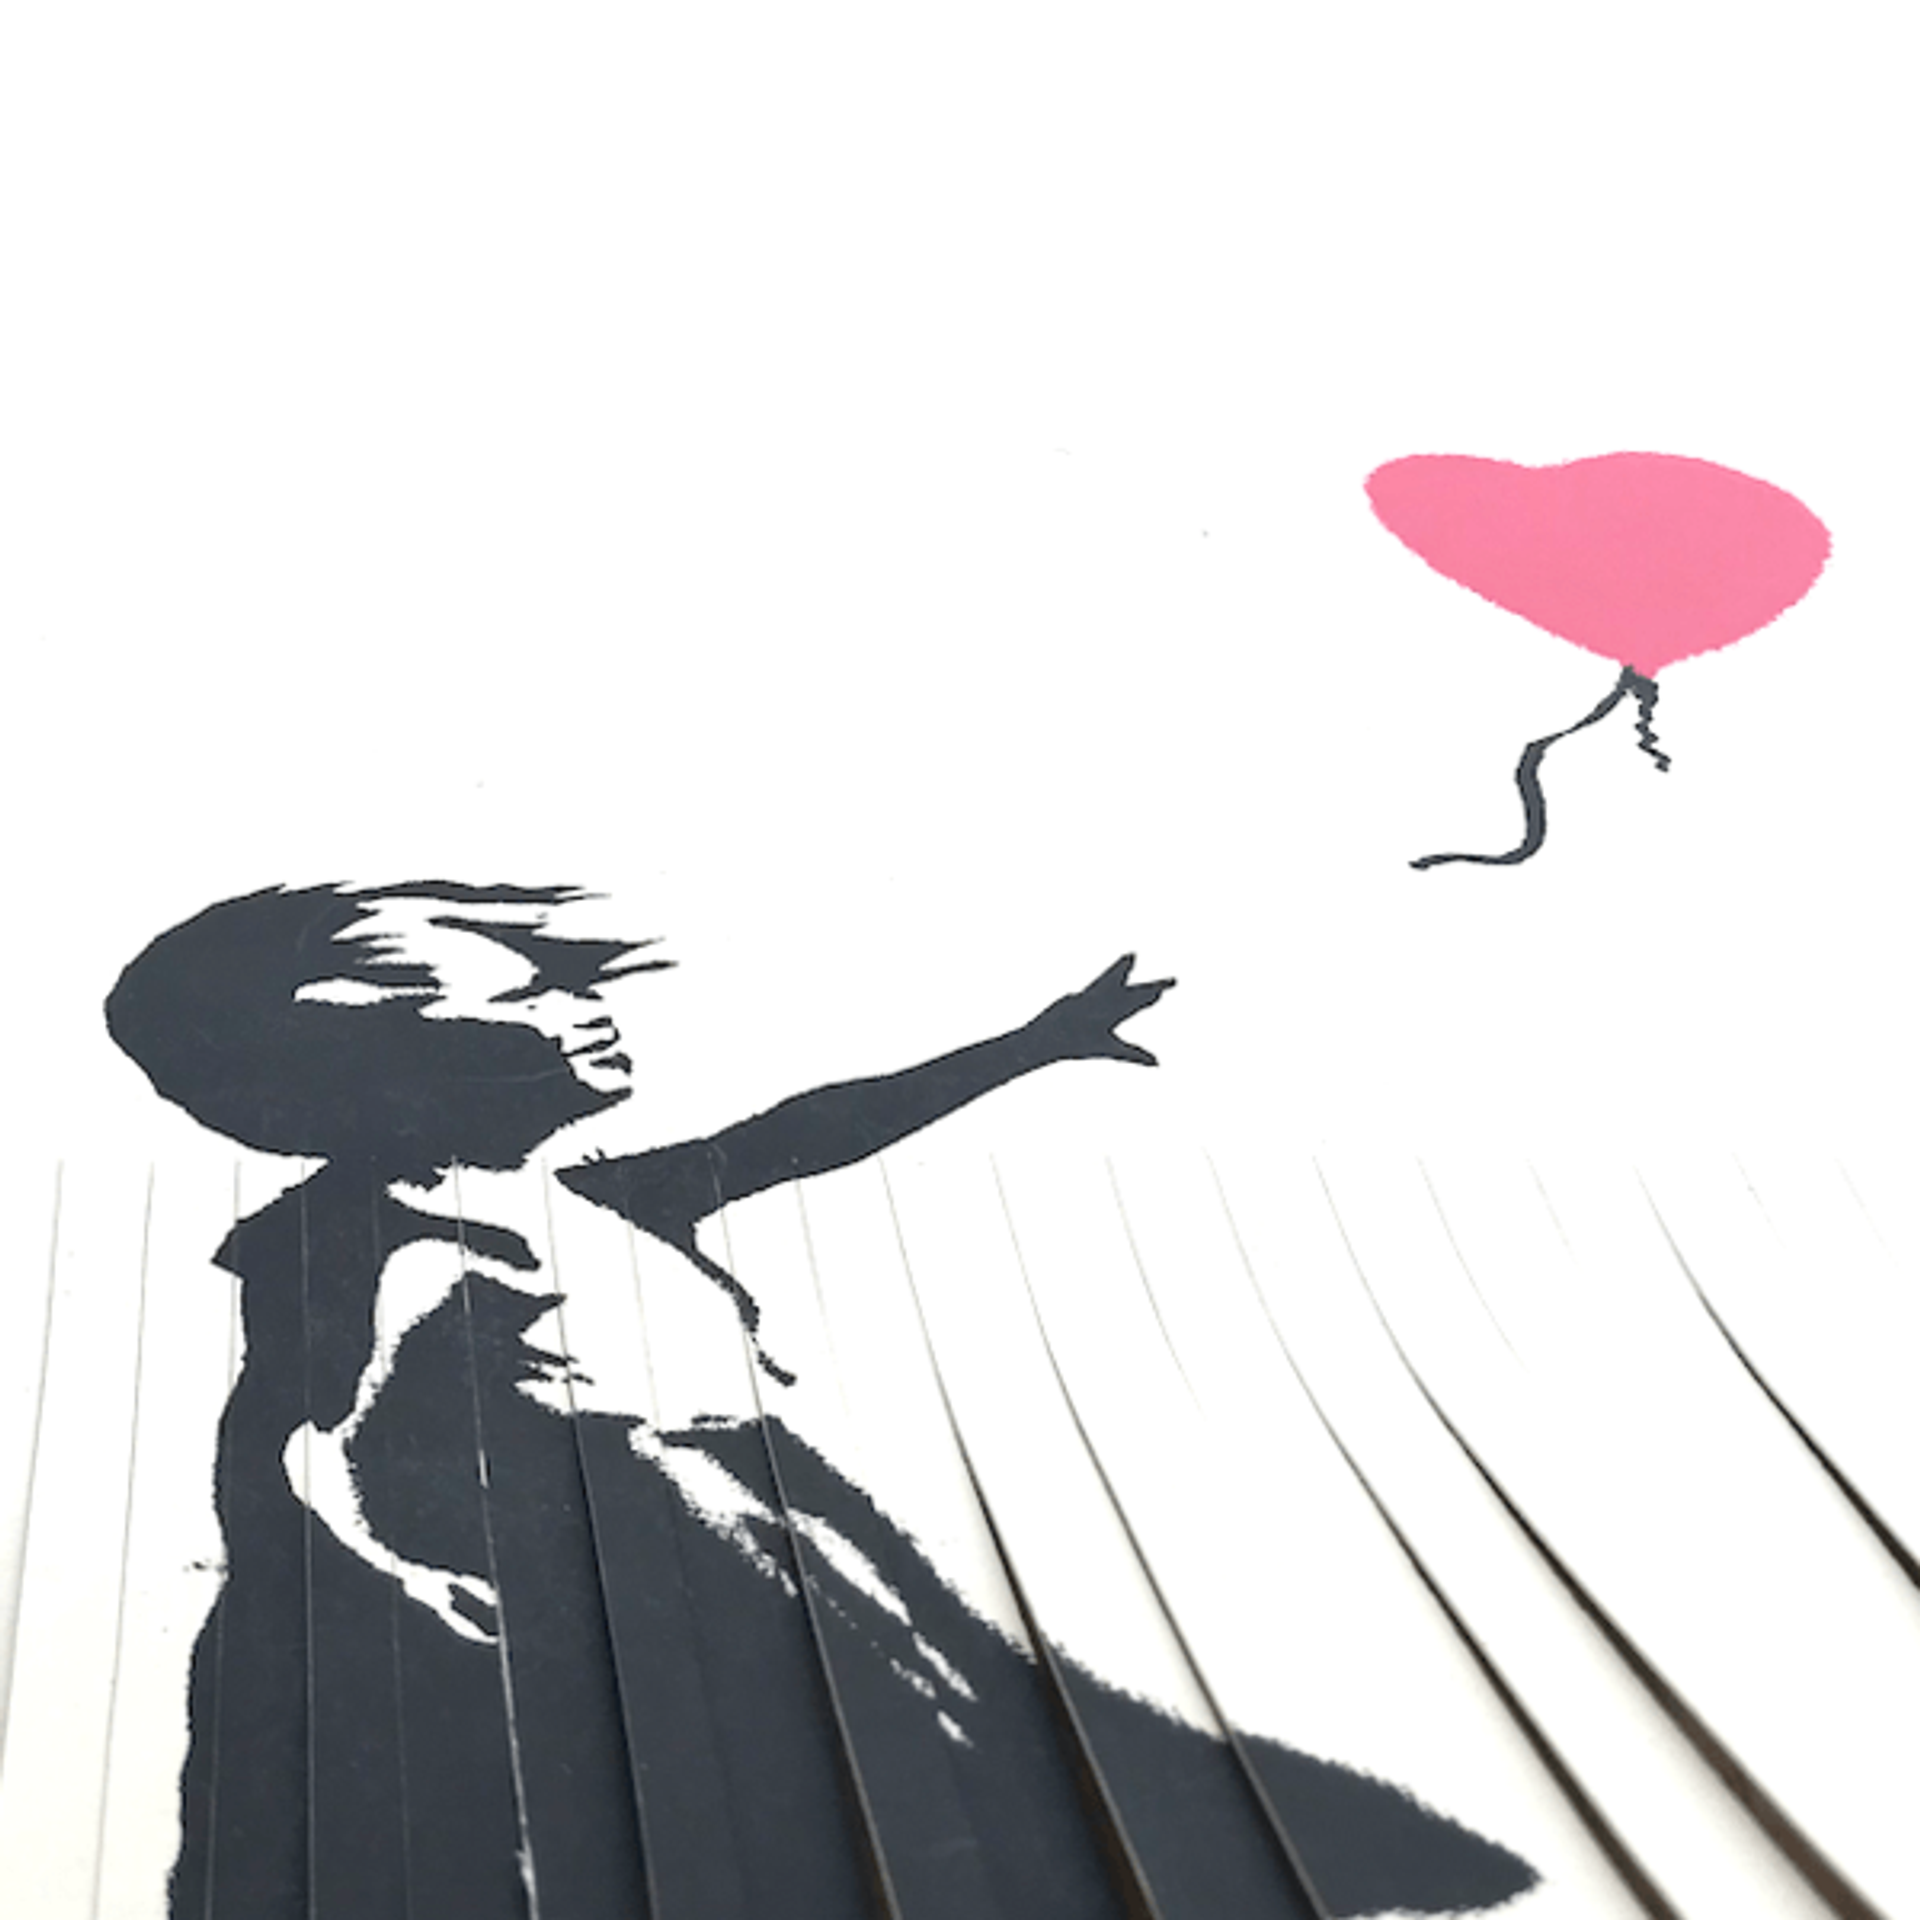 Shredded Girl With Balloon by Banksy